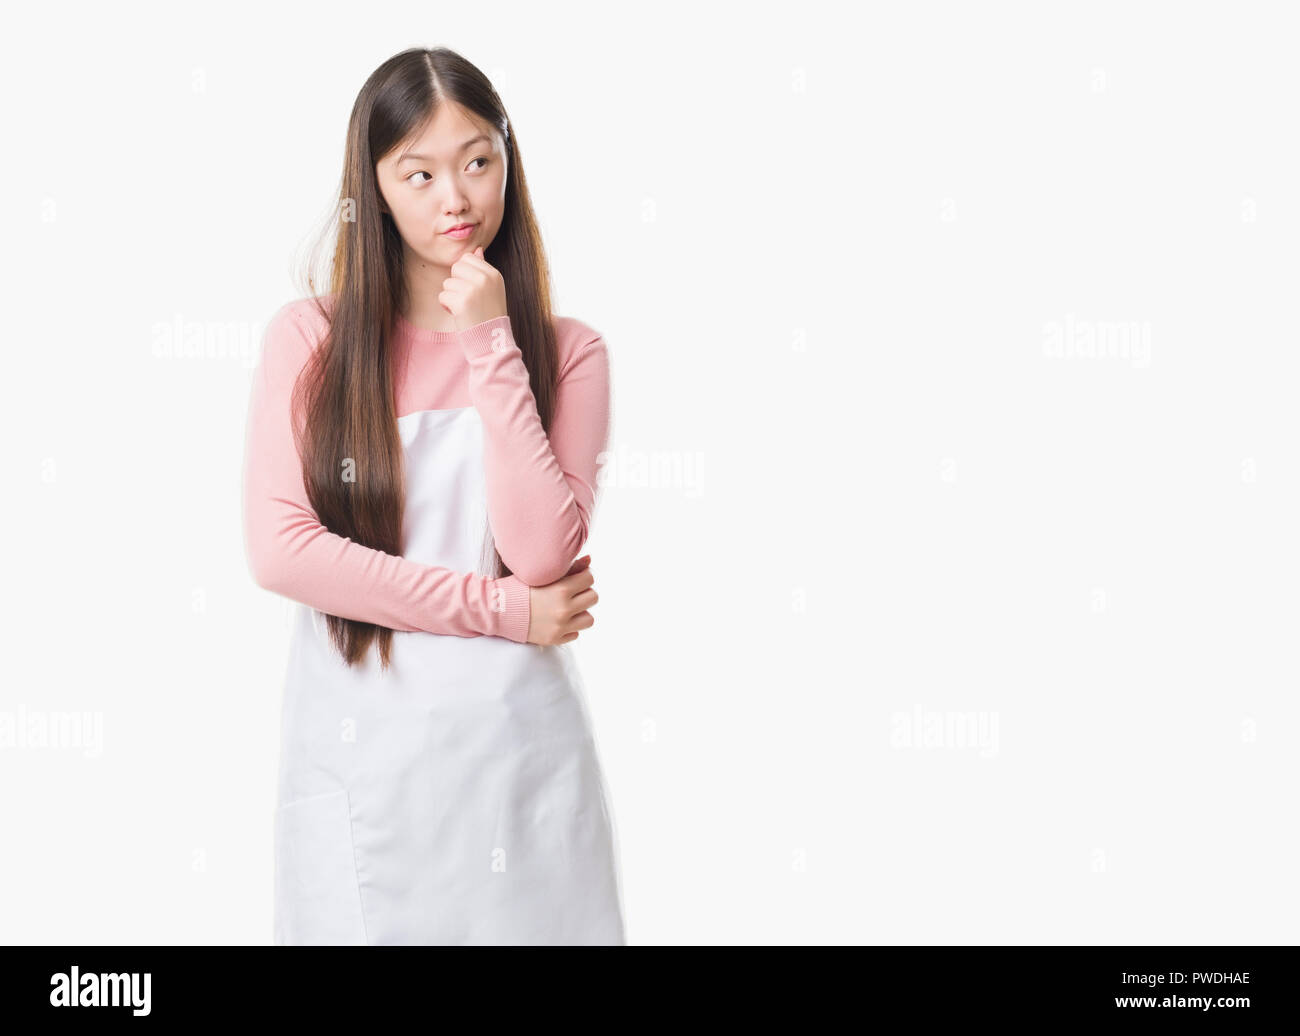 young-chinese-shop-owner-woman-over-isolated-background-wearing-white-apron-serious-face-thinking-about-question-very-confused-idea-PWDHAE